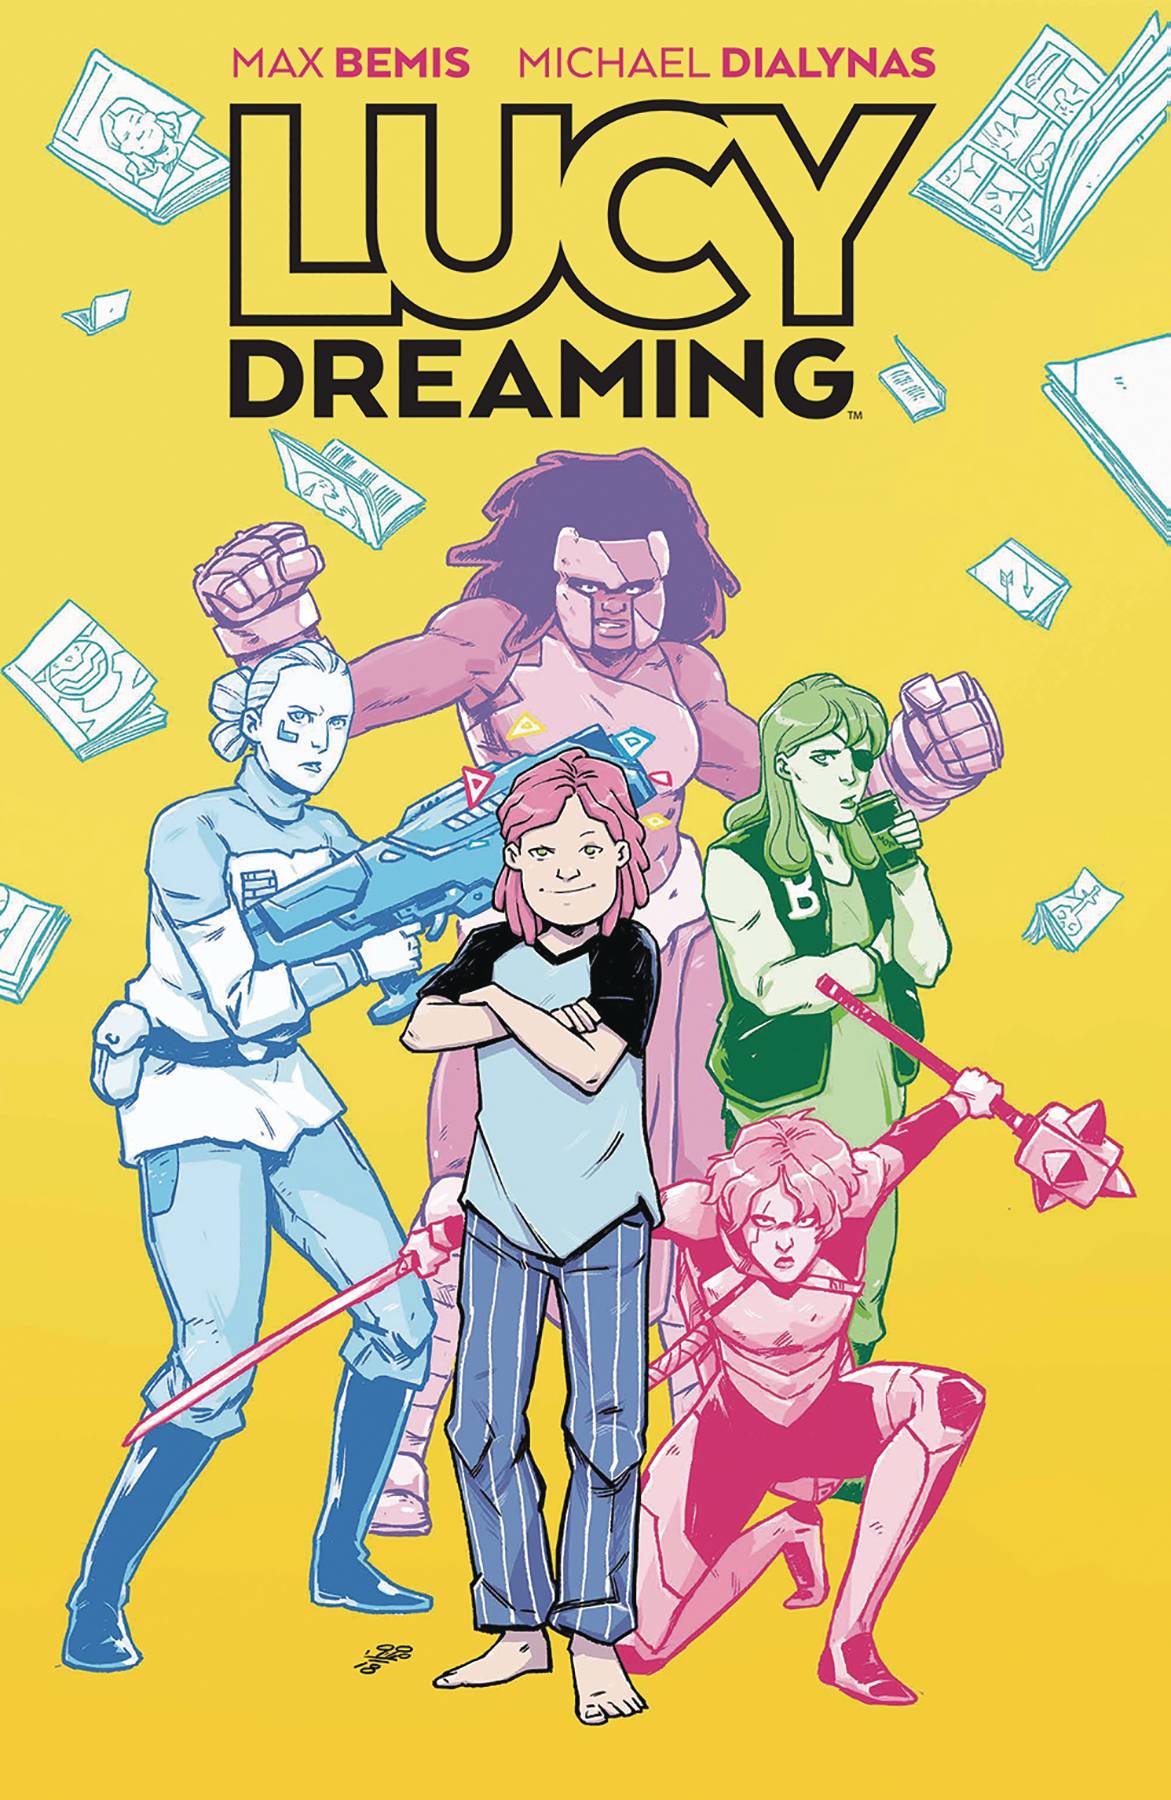 Lucy Dreaming Graphic Novel